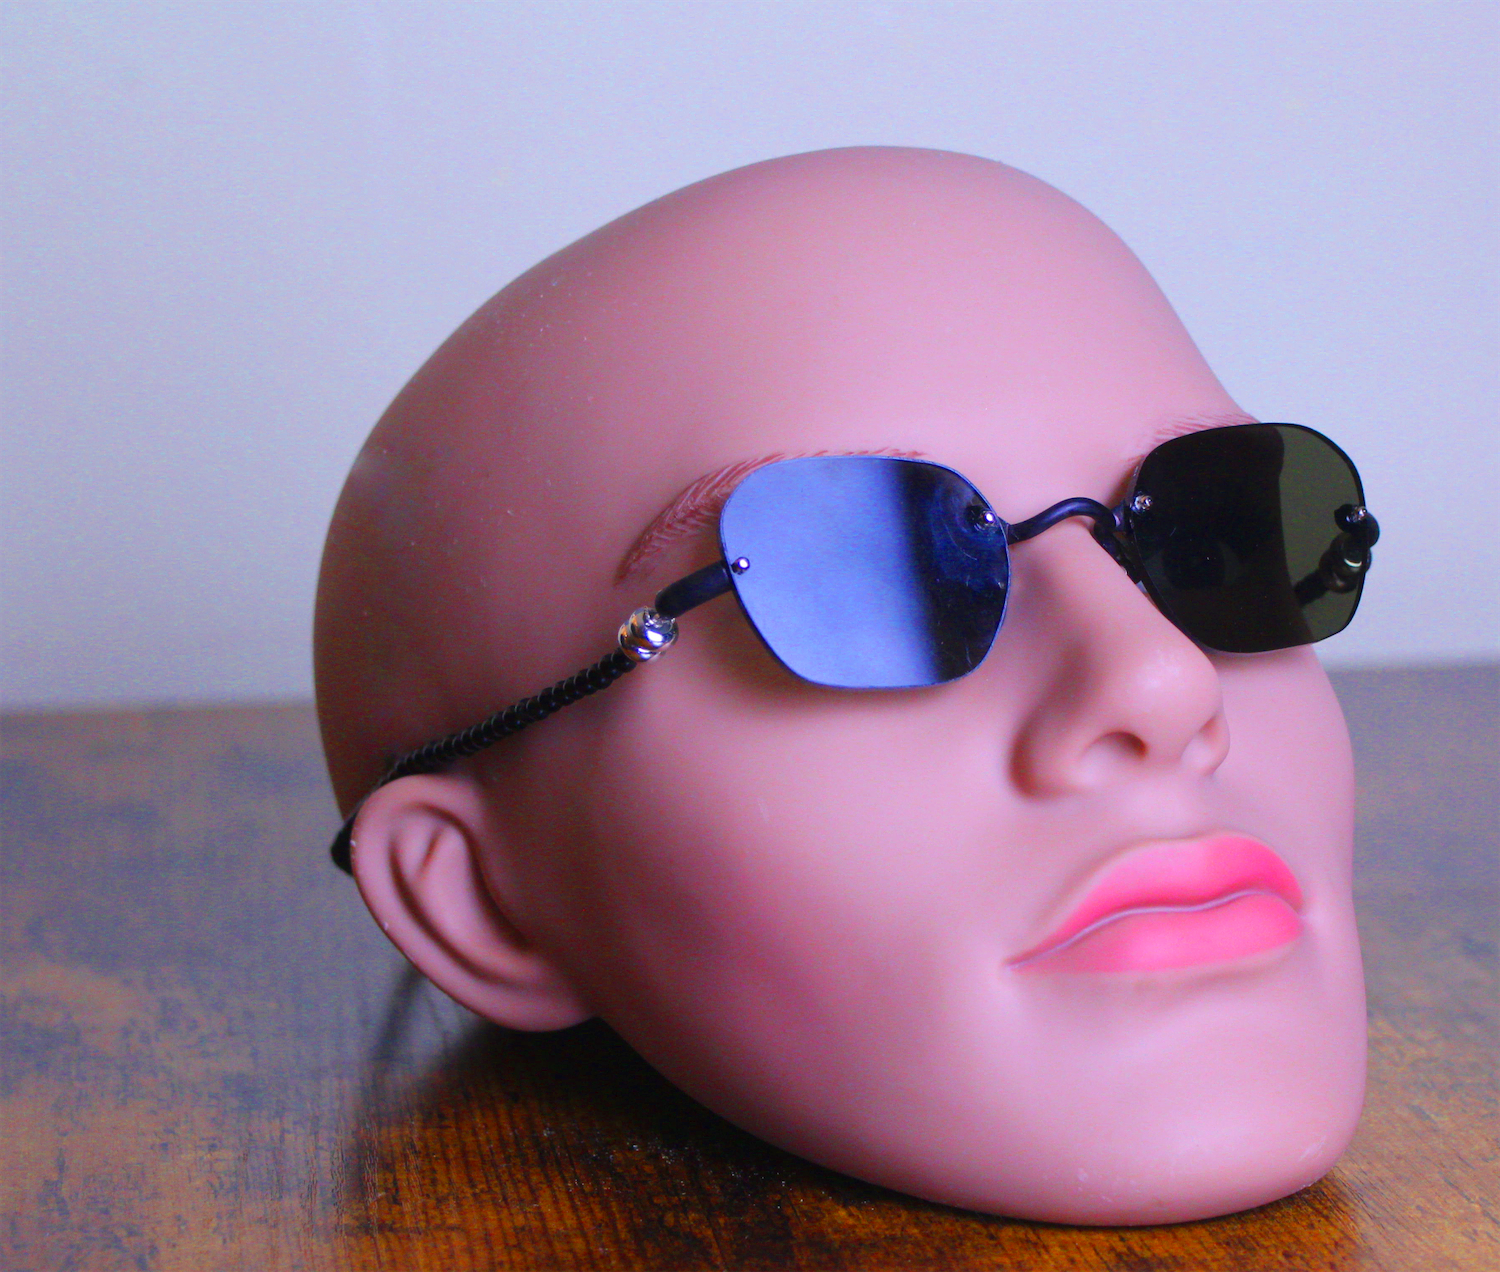 Shows osumura chained sunglasses on a mannequin head.